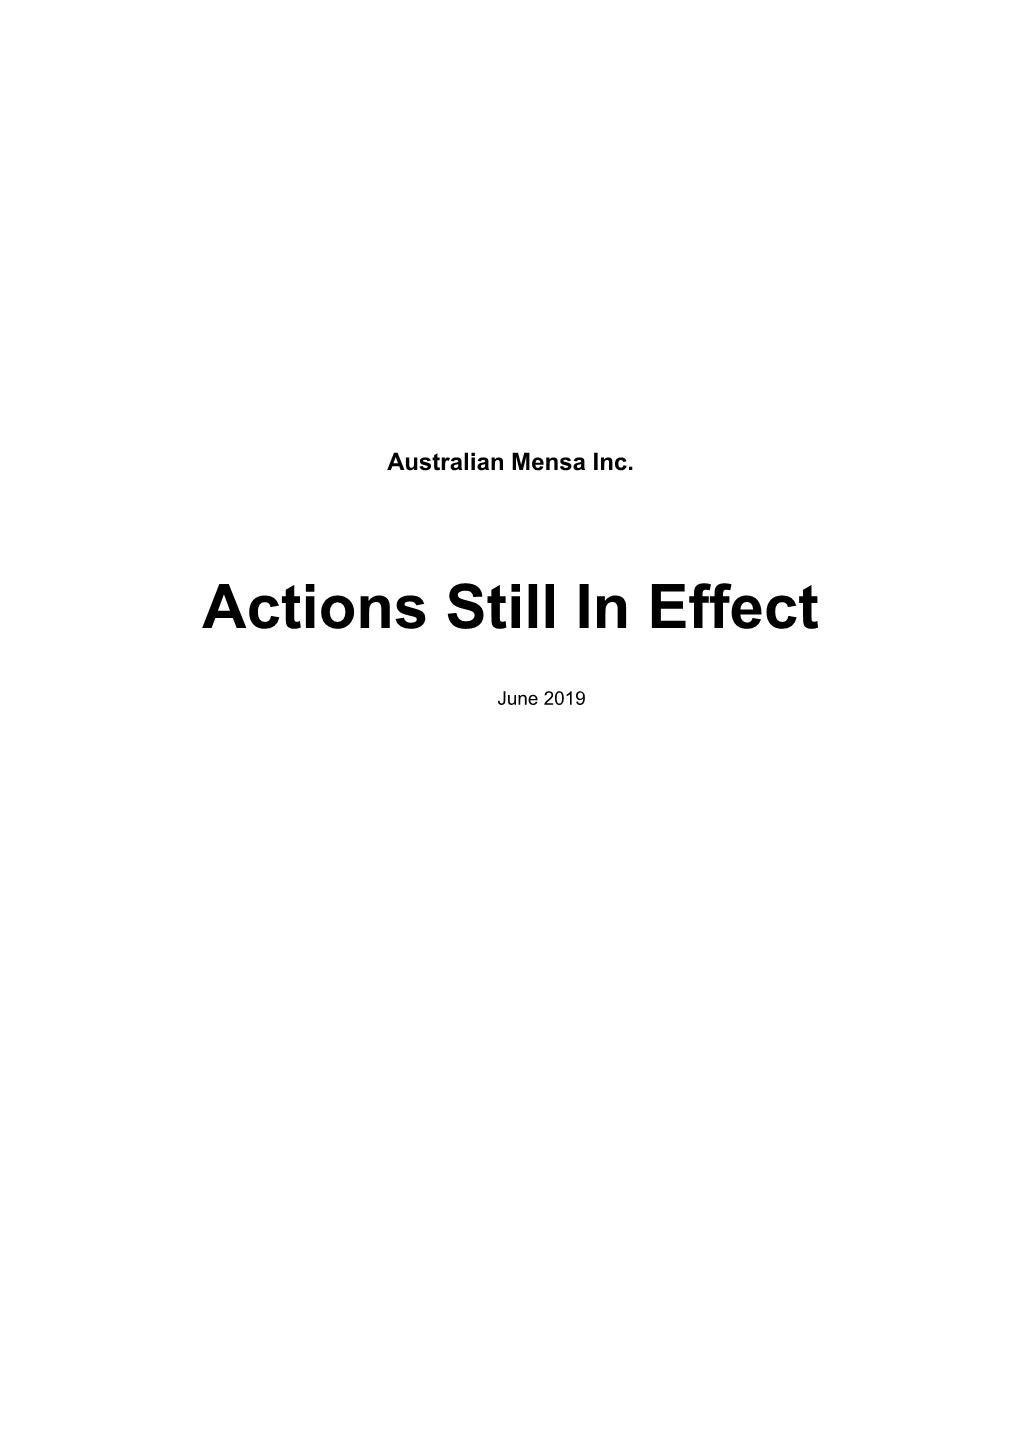 Actions Still in Effect